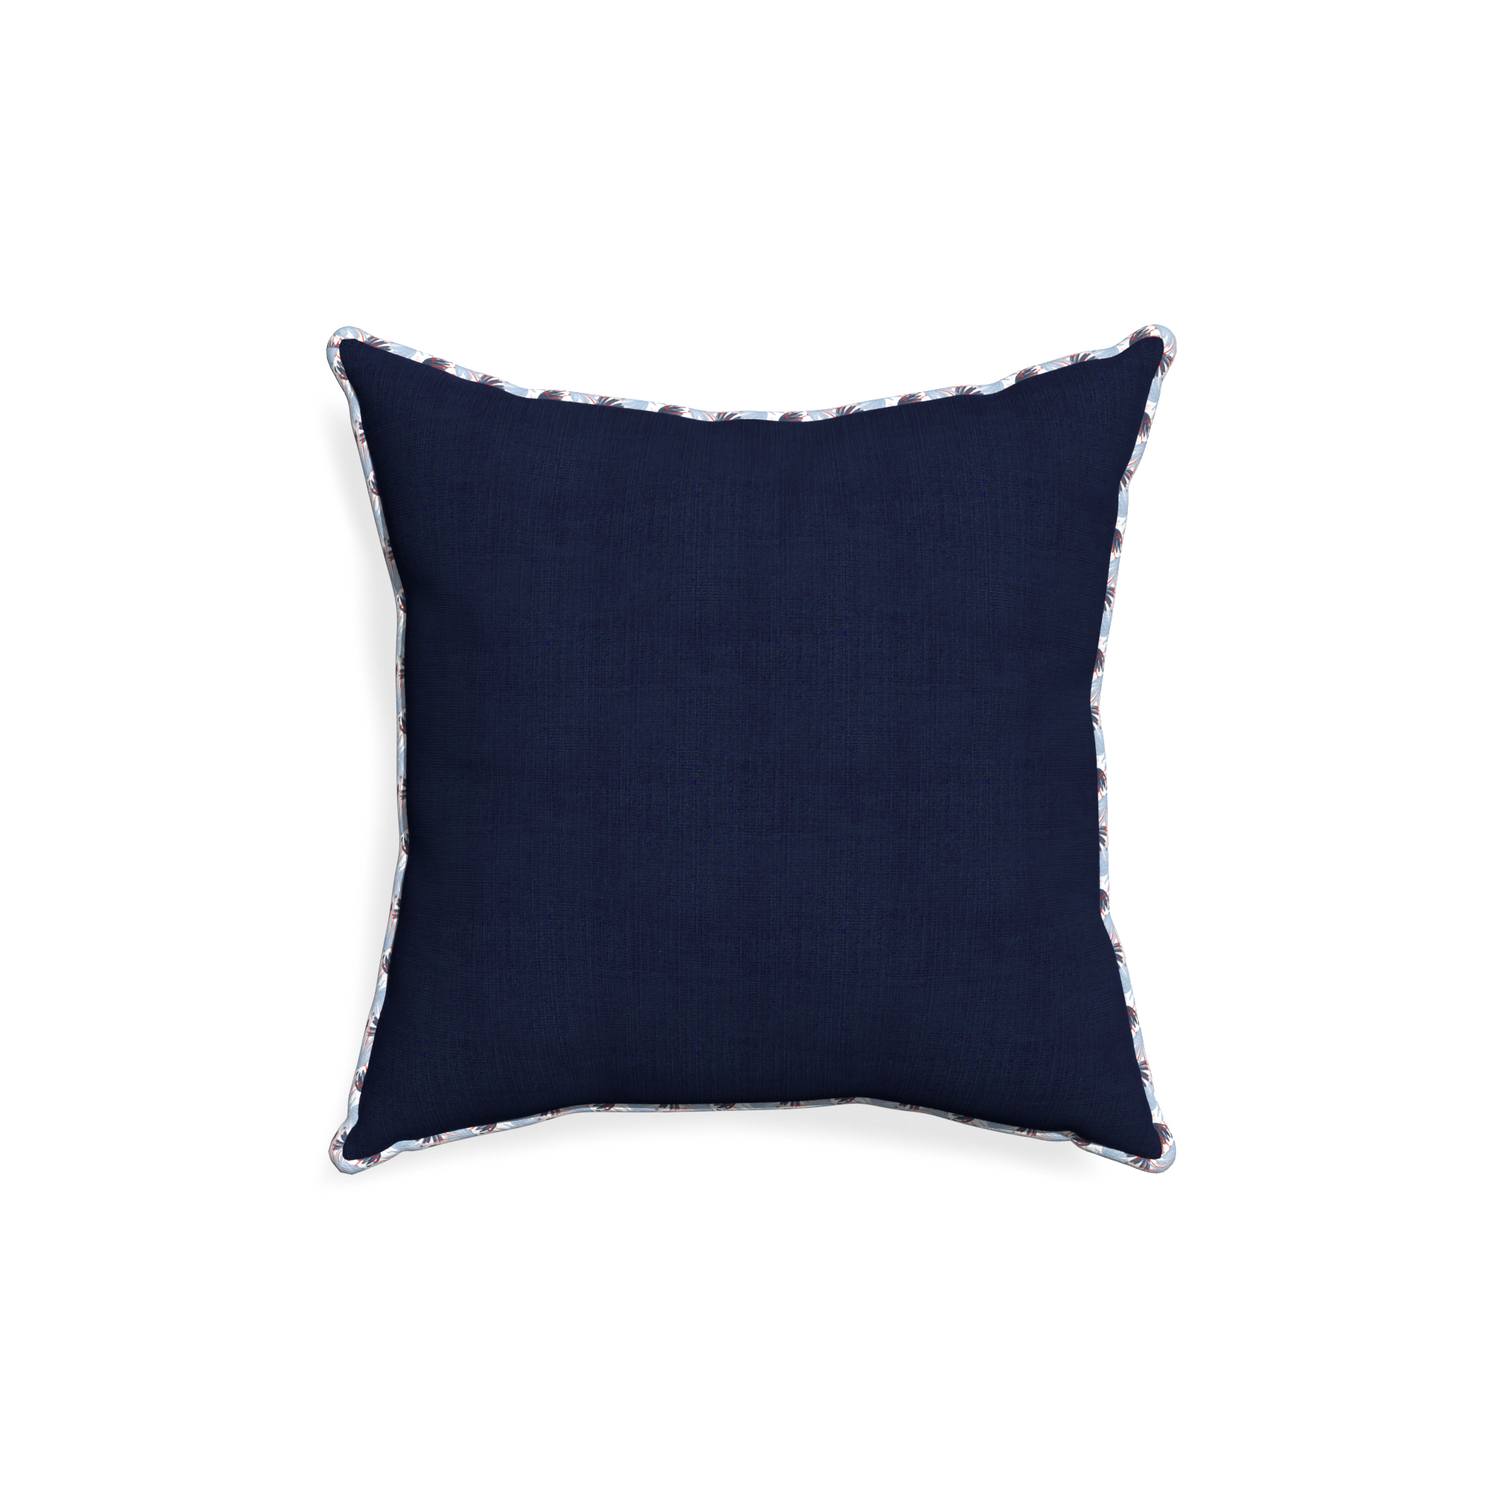 18-square midnight custom pillow with e piping on white background